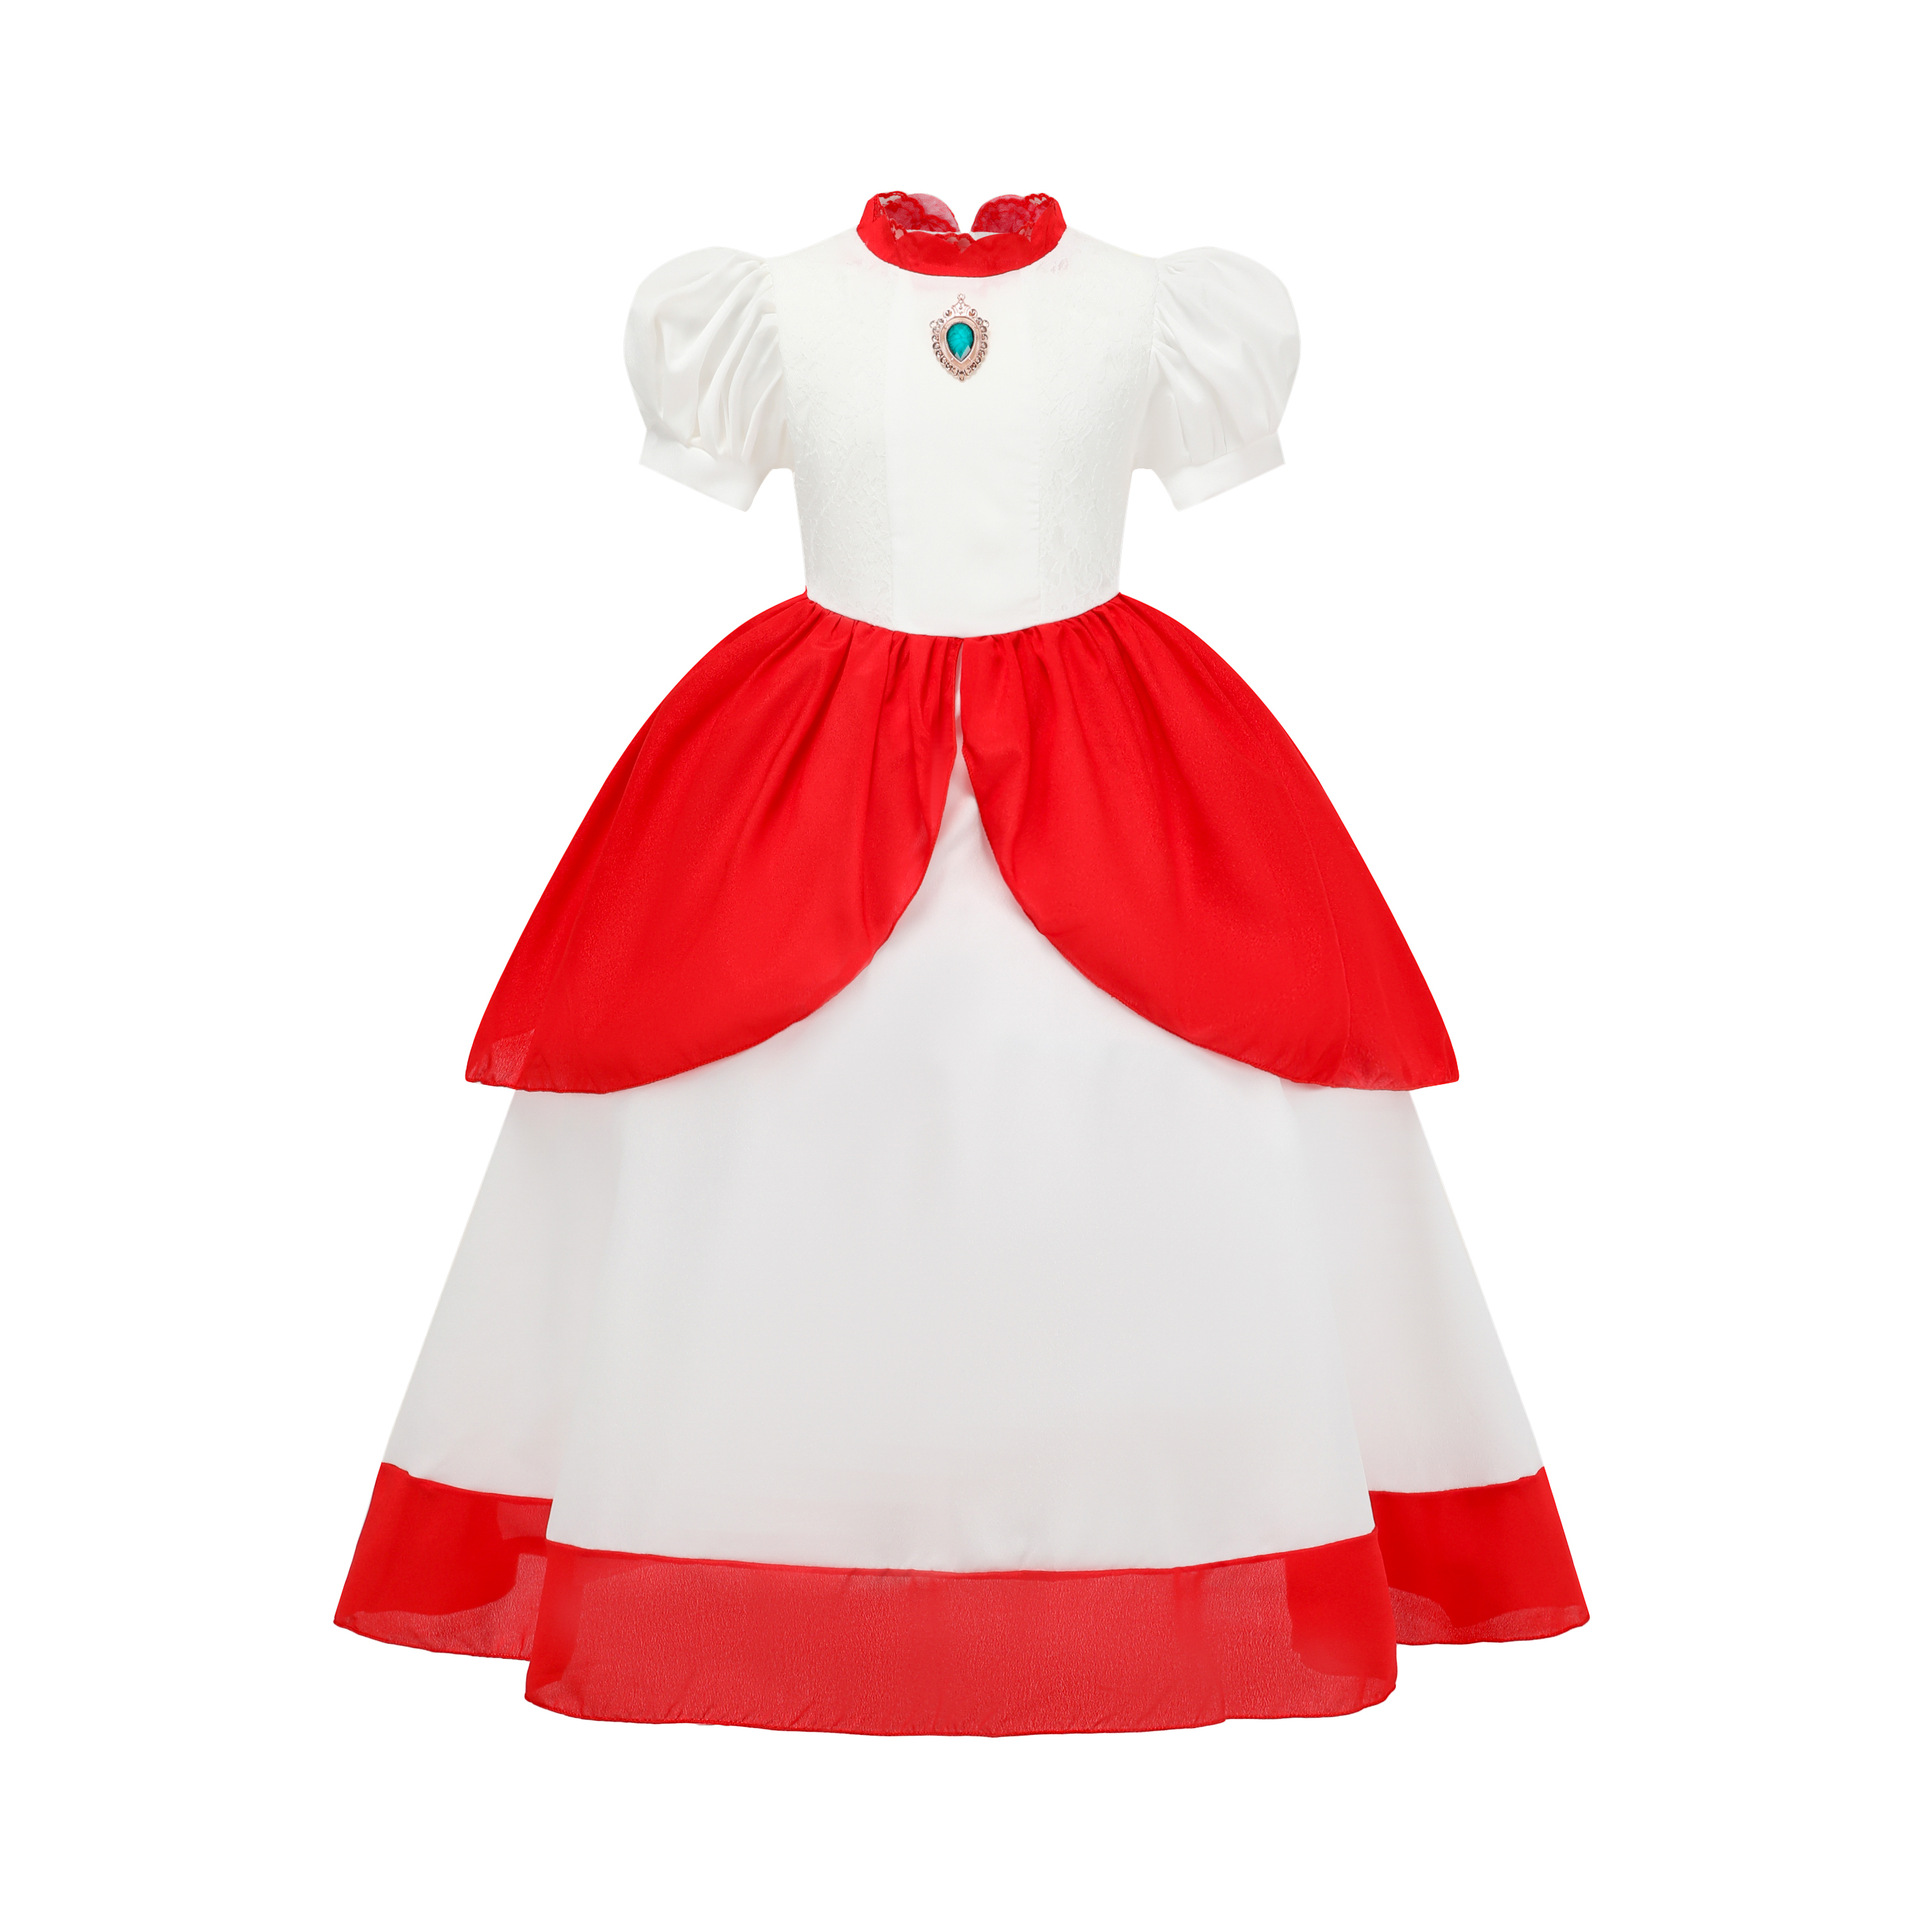 Princess Peach Lace Dress for Girls - Super Mario Cosplay Kids Gown